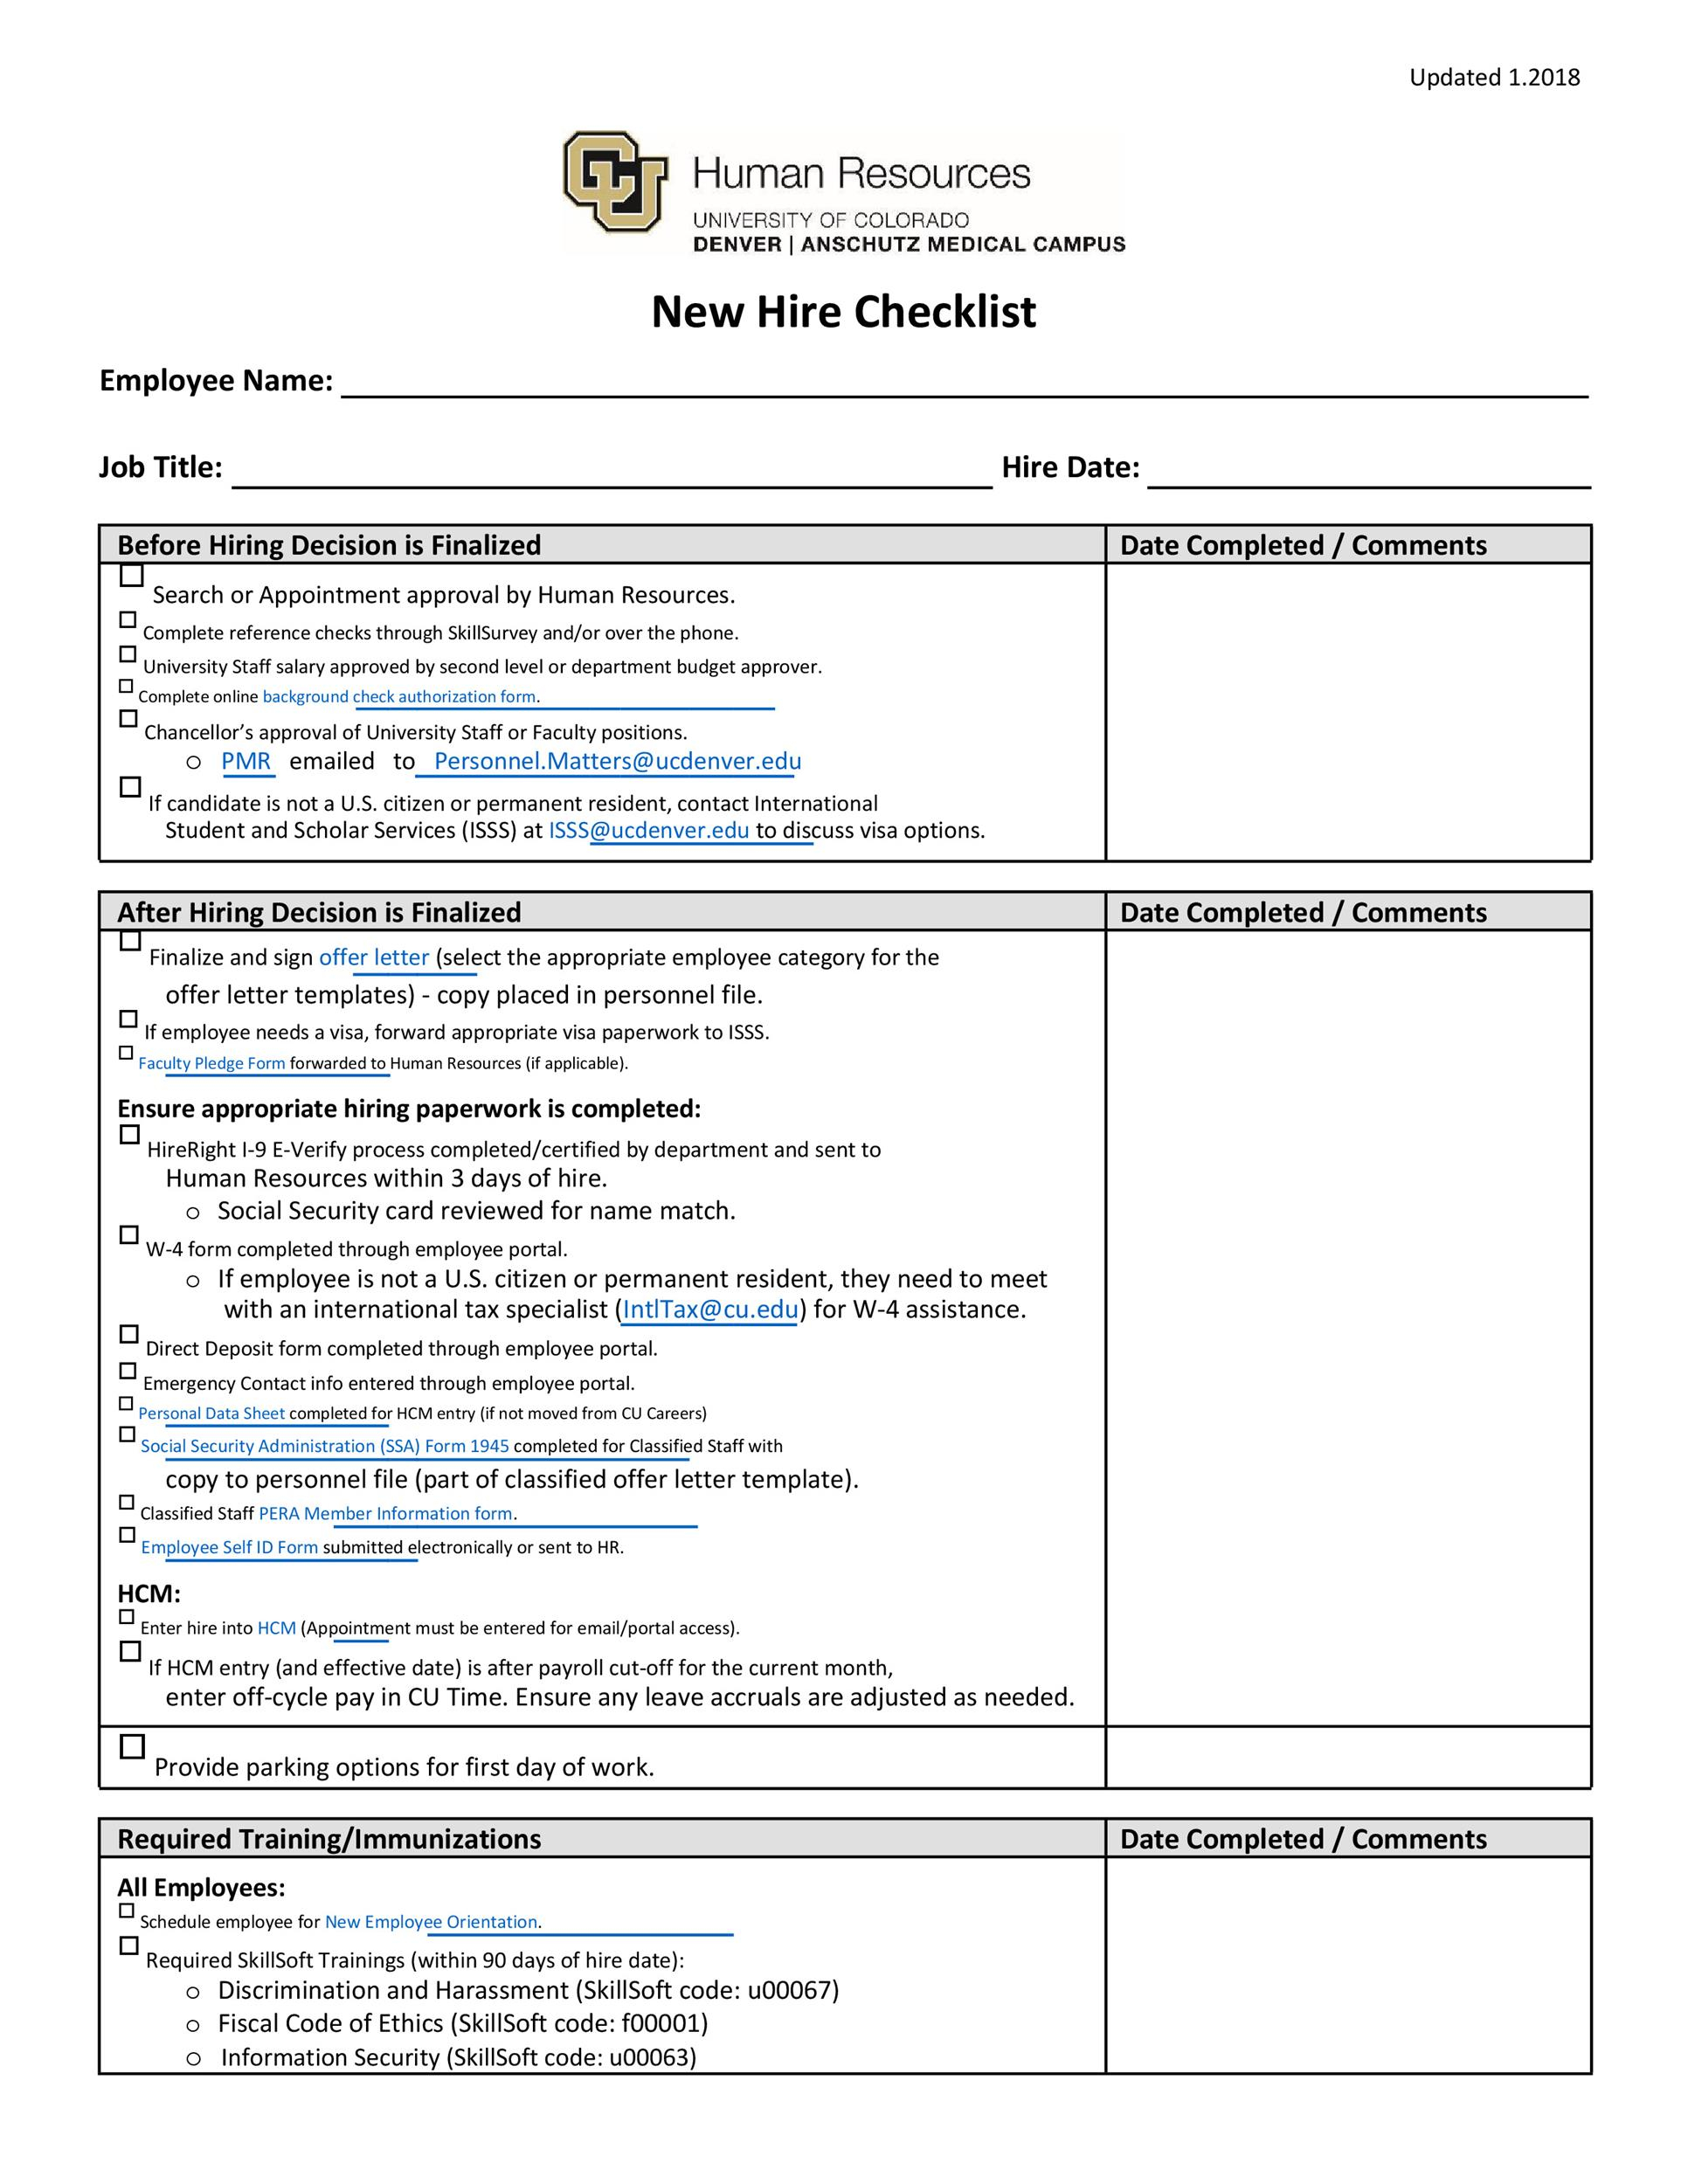 10 Useful New Hire Checklist Templates & Forms ᐅ TemplateLab Throughout Employee Personnel File Checklist Template Regarding Employee Personnel File Checklist Template